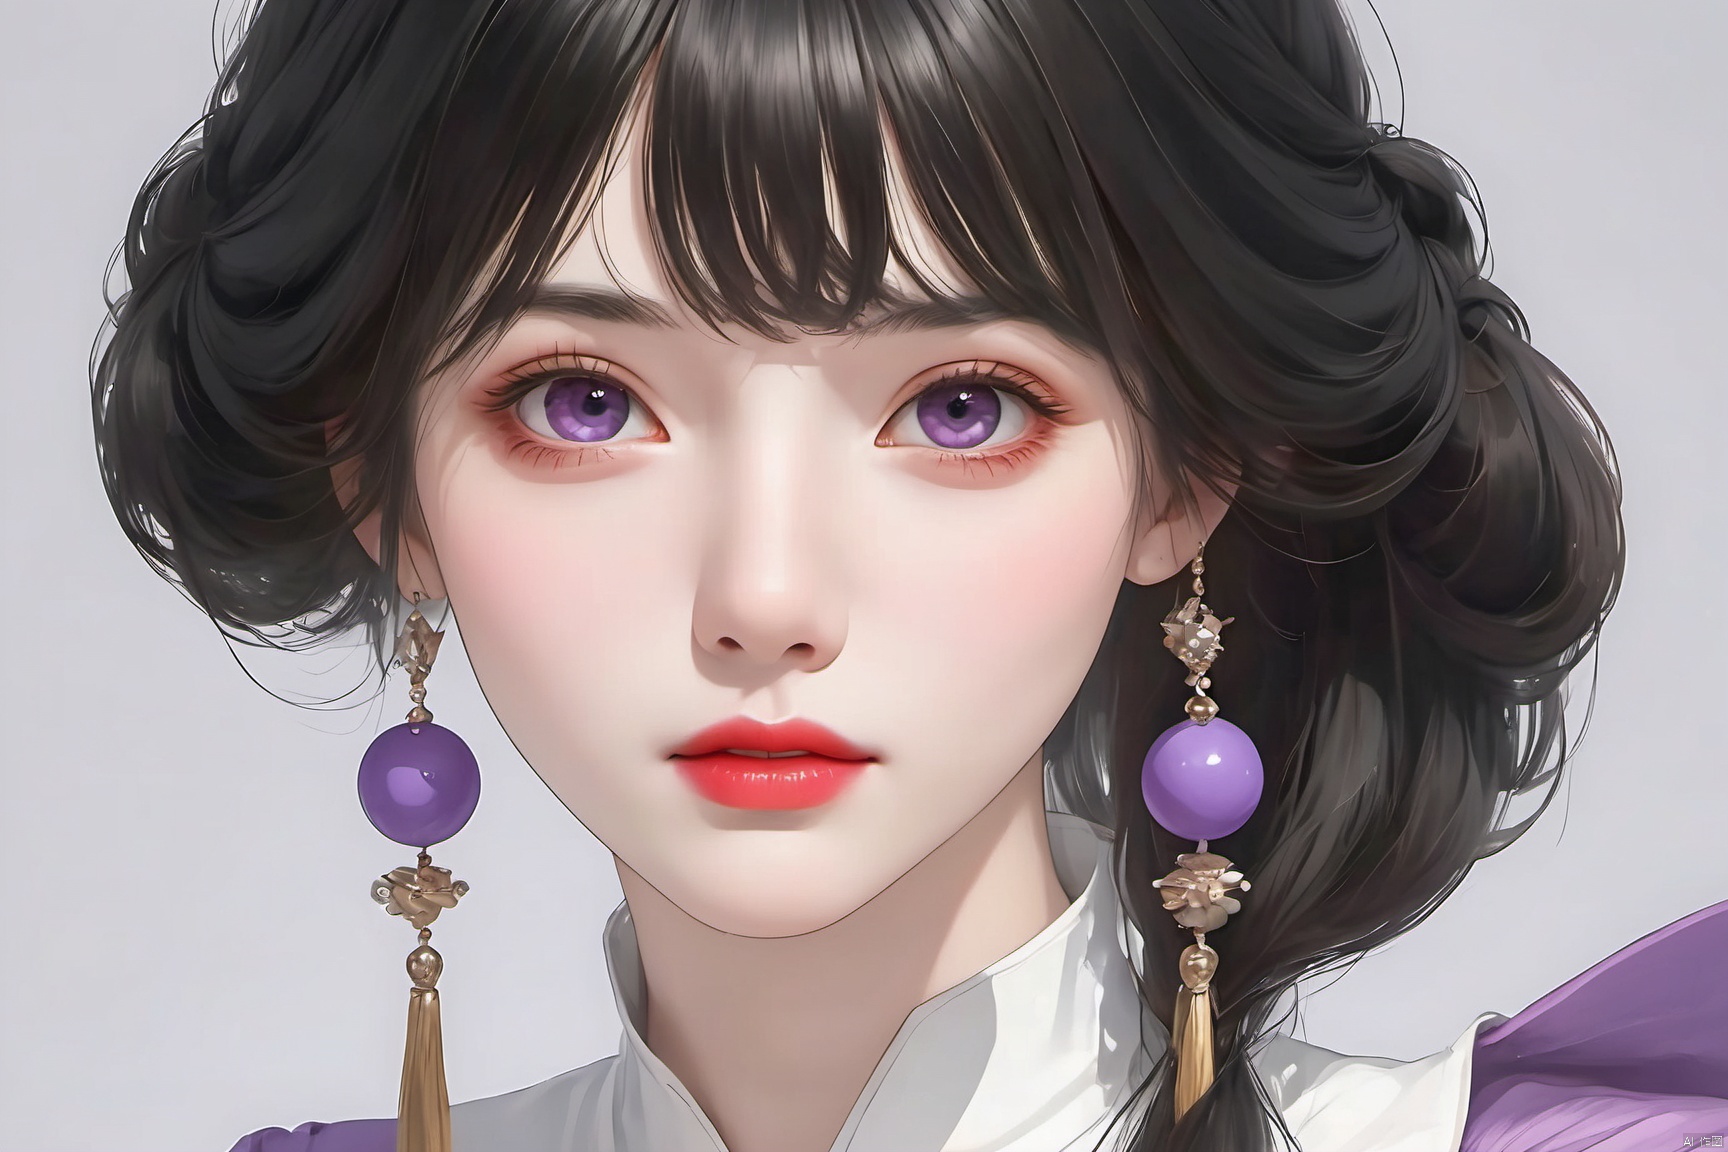  (highest resolution, distinct_image) The best quality, a woman, masterpiece, highly detailed, (semi-realistic), long black hair, long straight hair, black hair bangs, purple eyes, mature, cherry glossy lips, white background, close-up portrait, solid circle eyes, minimalistic